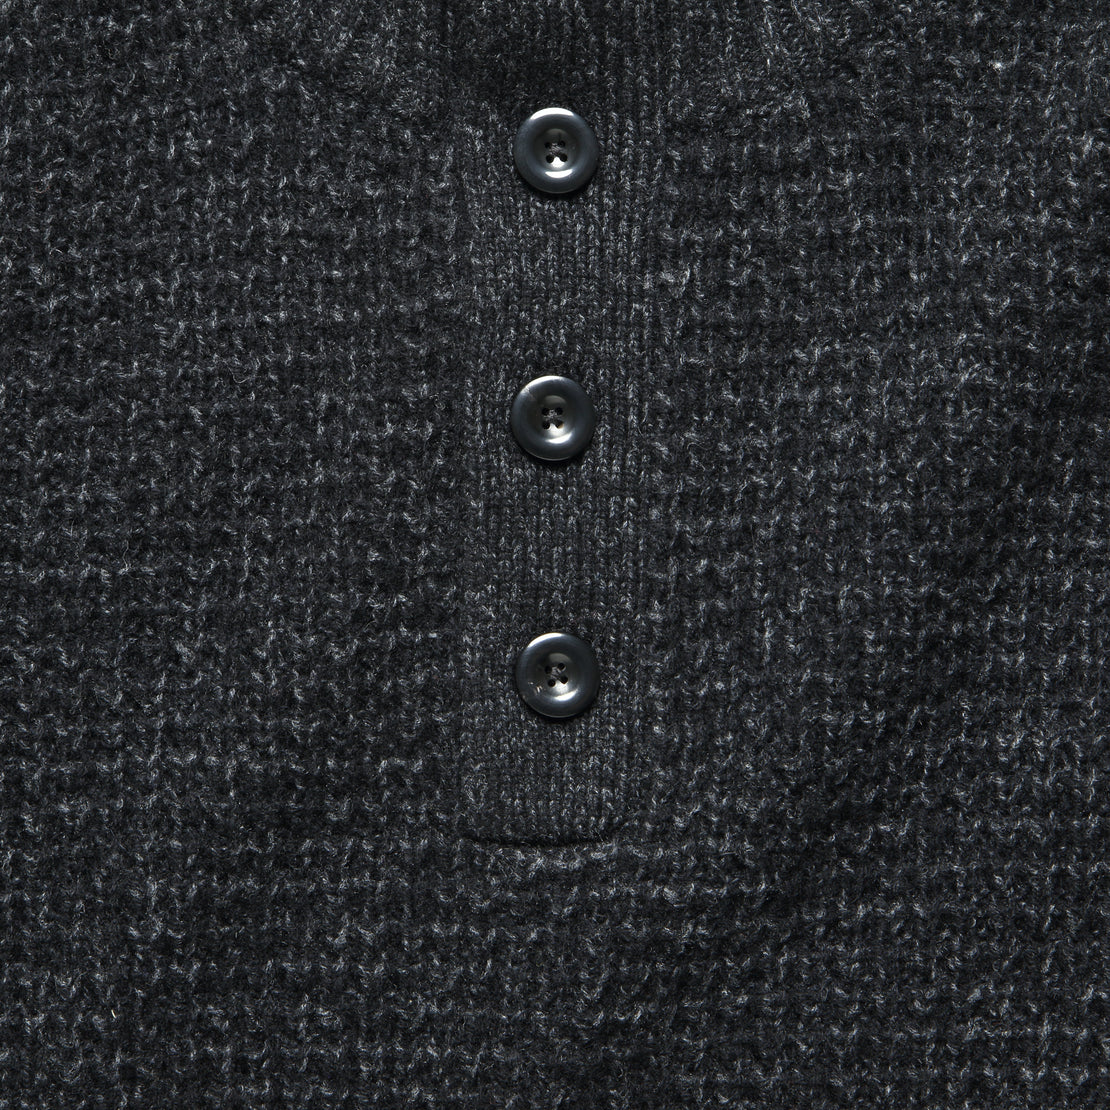 Cashmere Wool Quarter Button Sweater - Black Night Melange - Faherty - STAG Provisions - Tops - Sweater